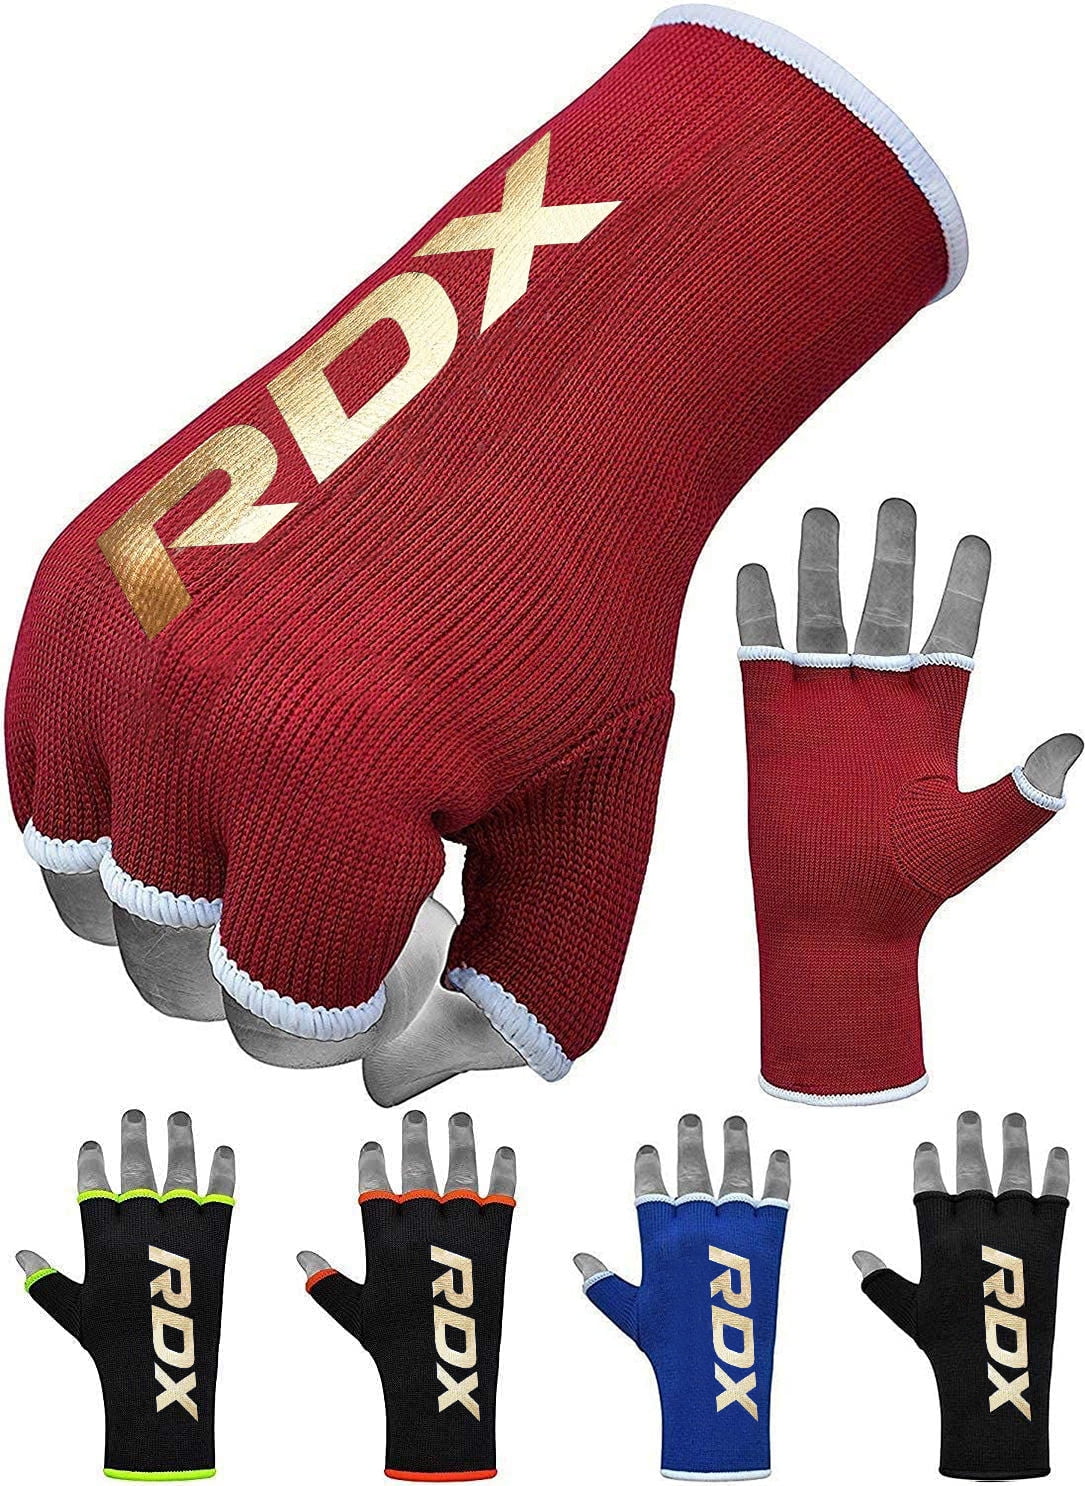 PRIME PRO HAND WRAPS BANDAGES BOXING GLOVES 3.5 METER HAND PROTECTION 